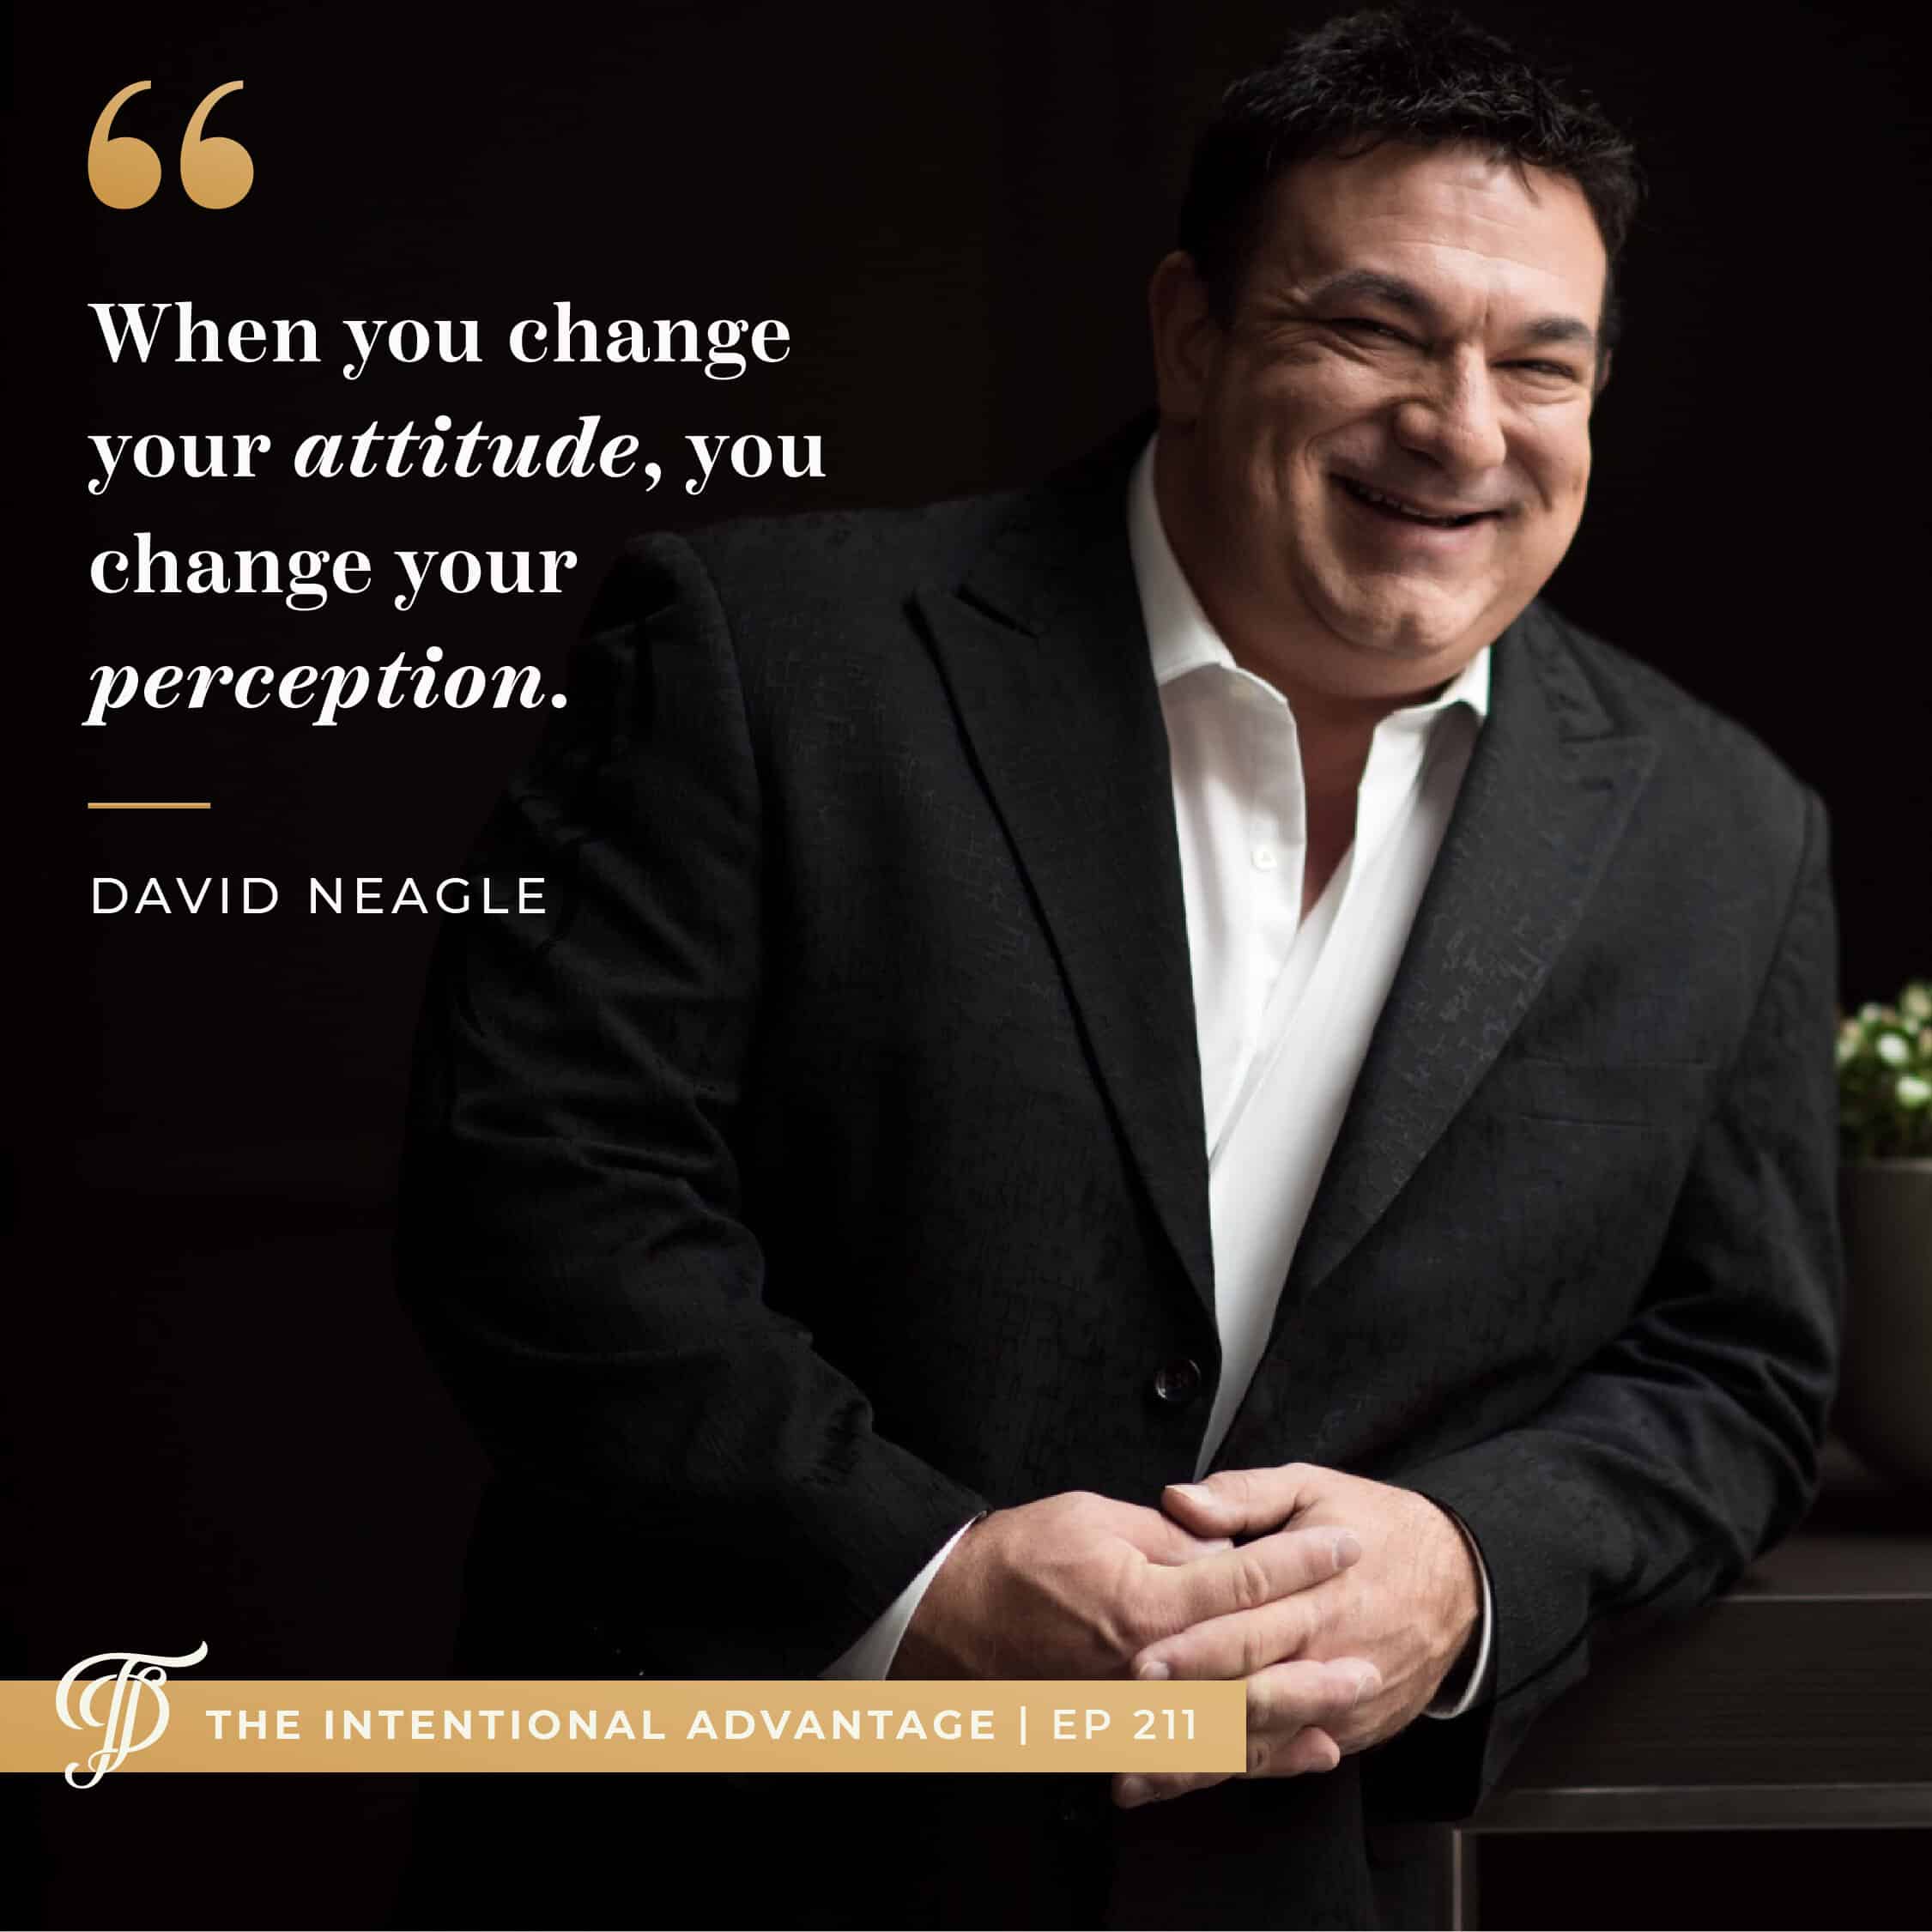 David Neagle podcast interview on The Intentional Advantage